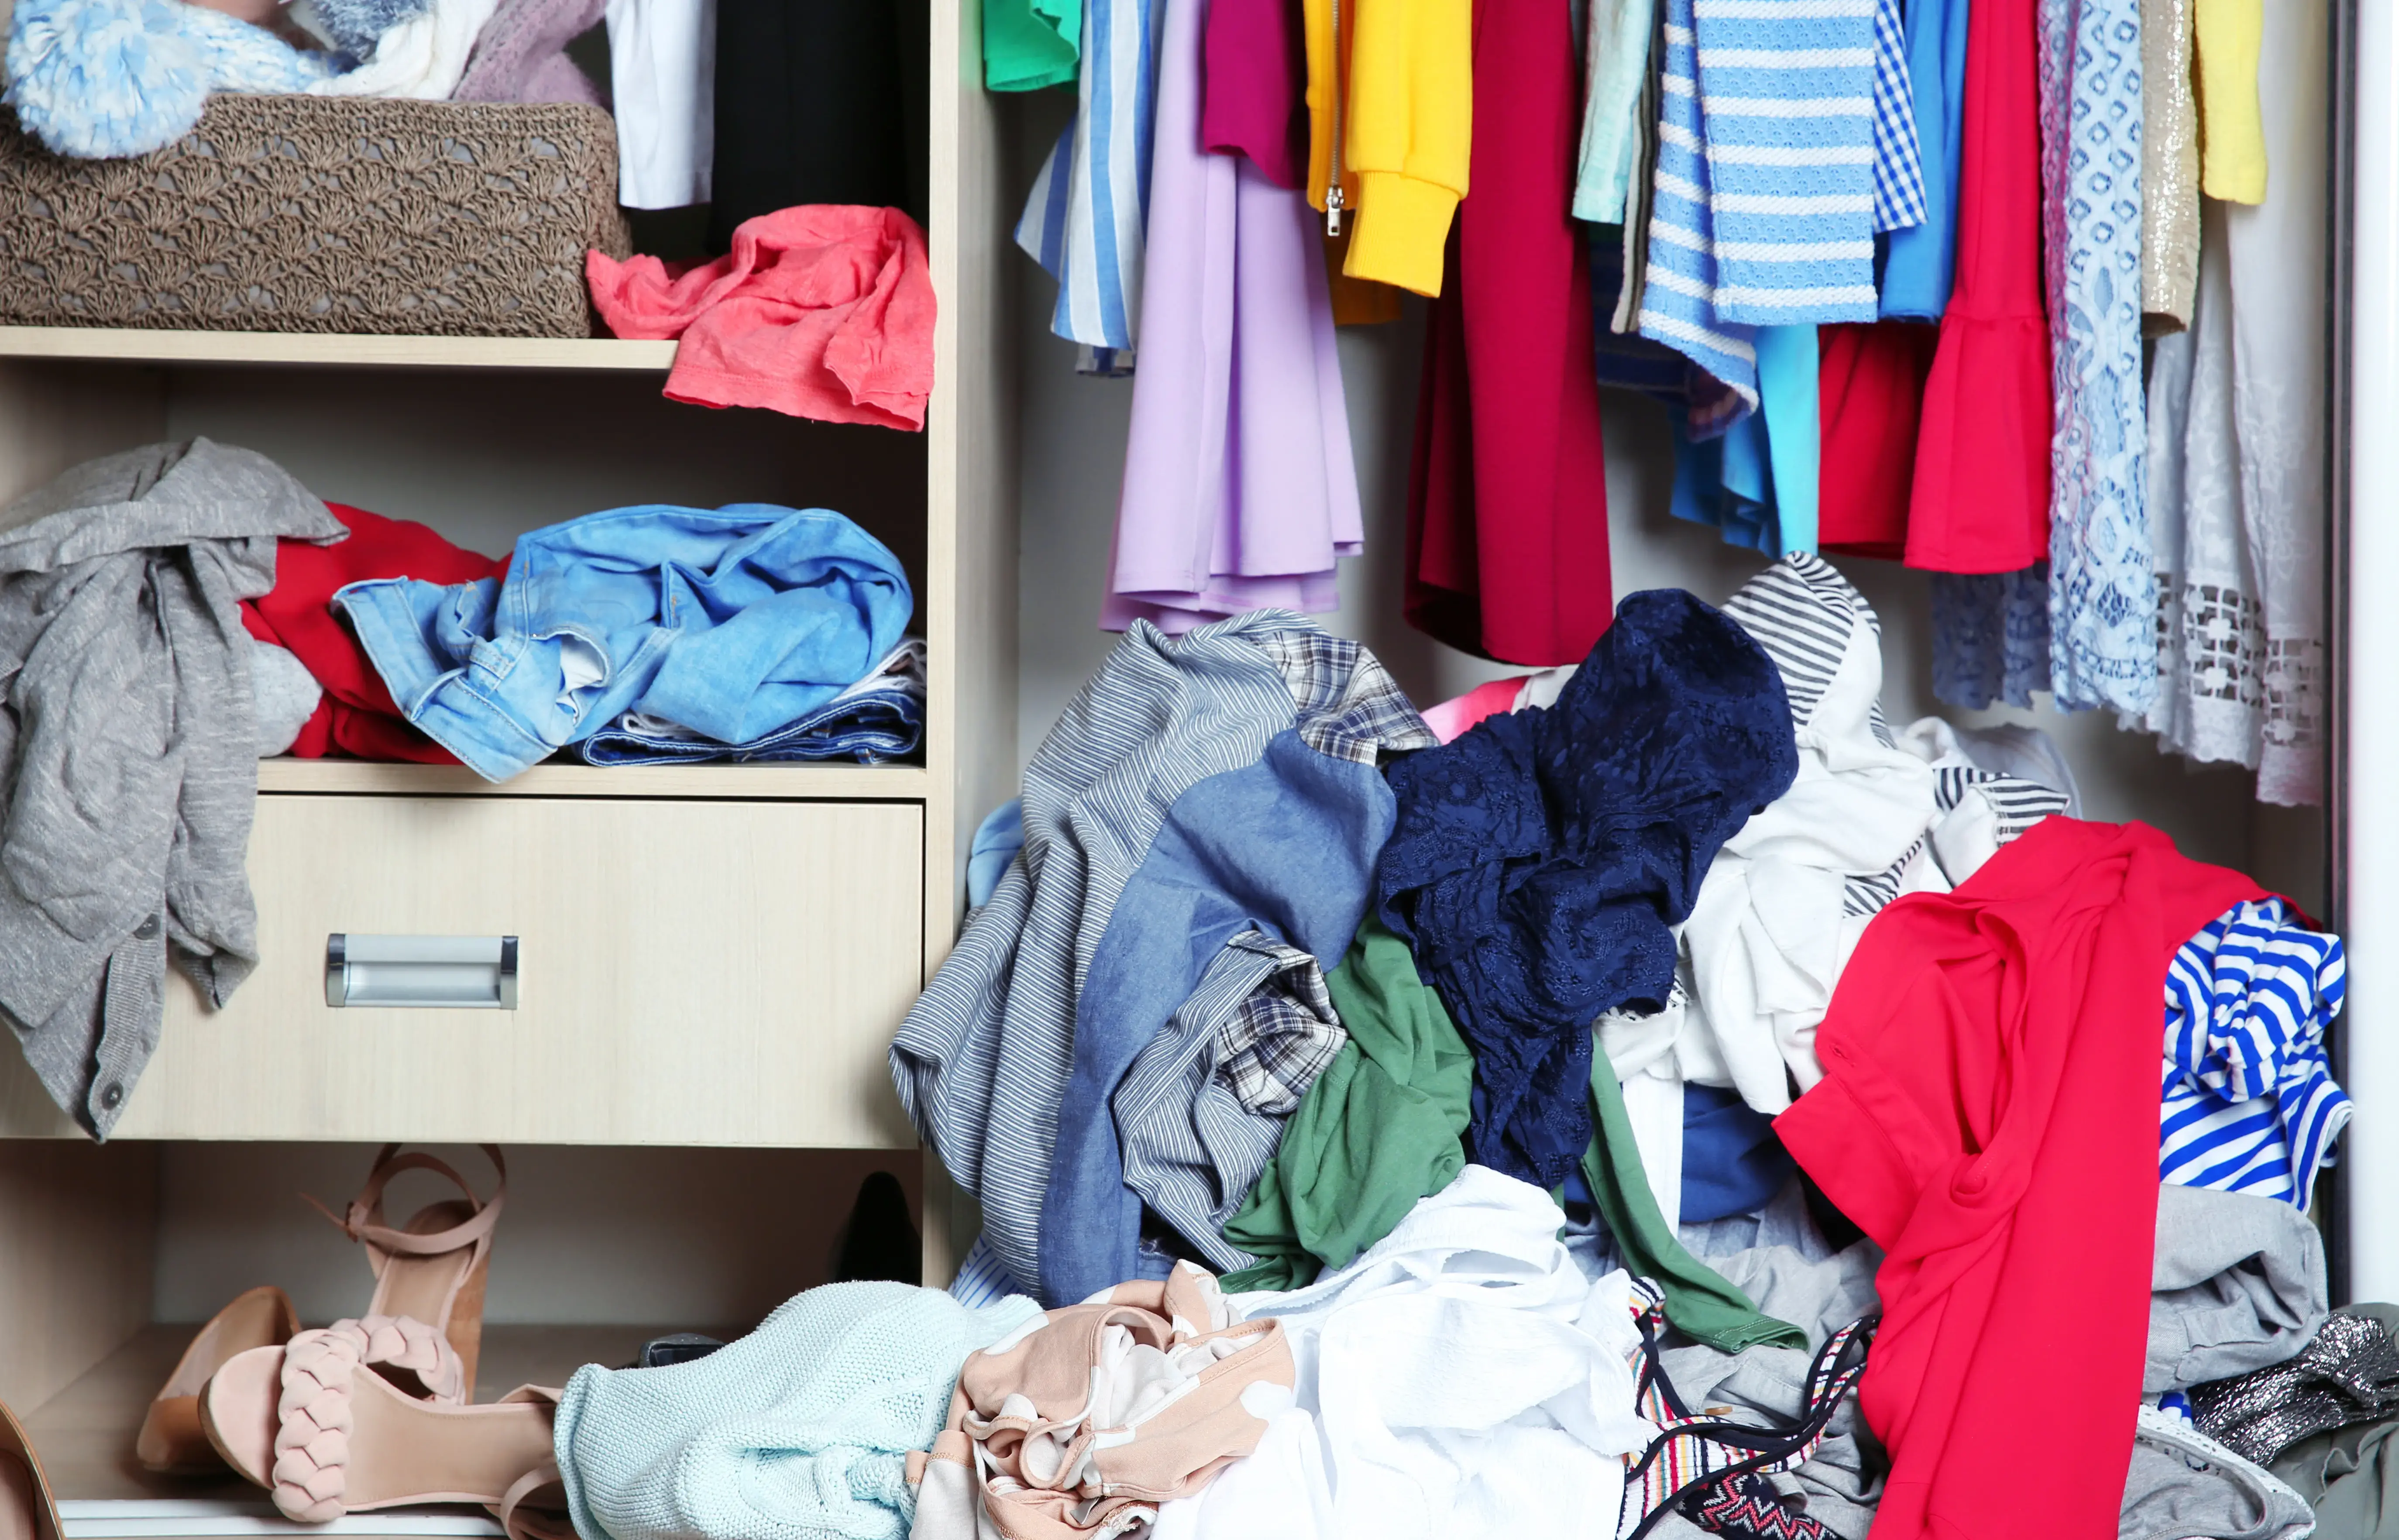 How to Prevent the Clothes in Your Closet from Smelling Musty